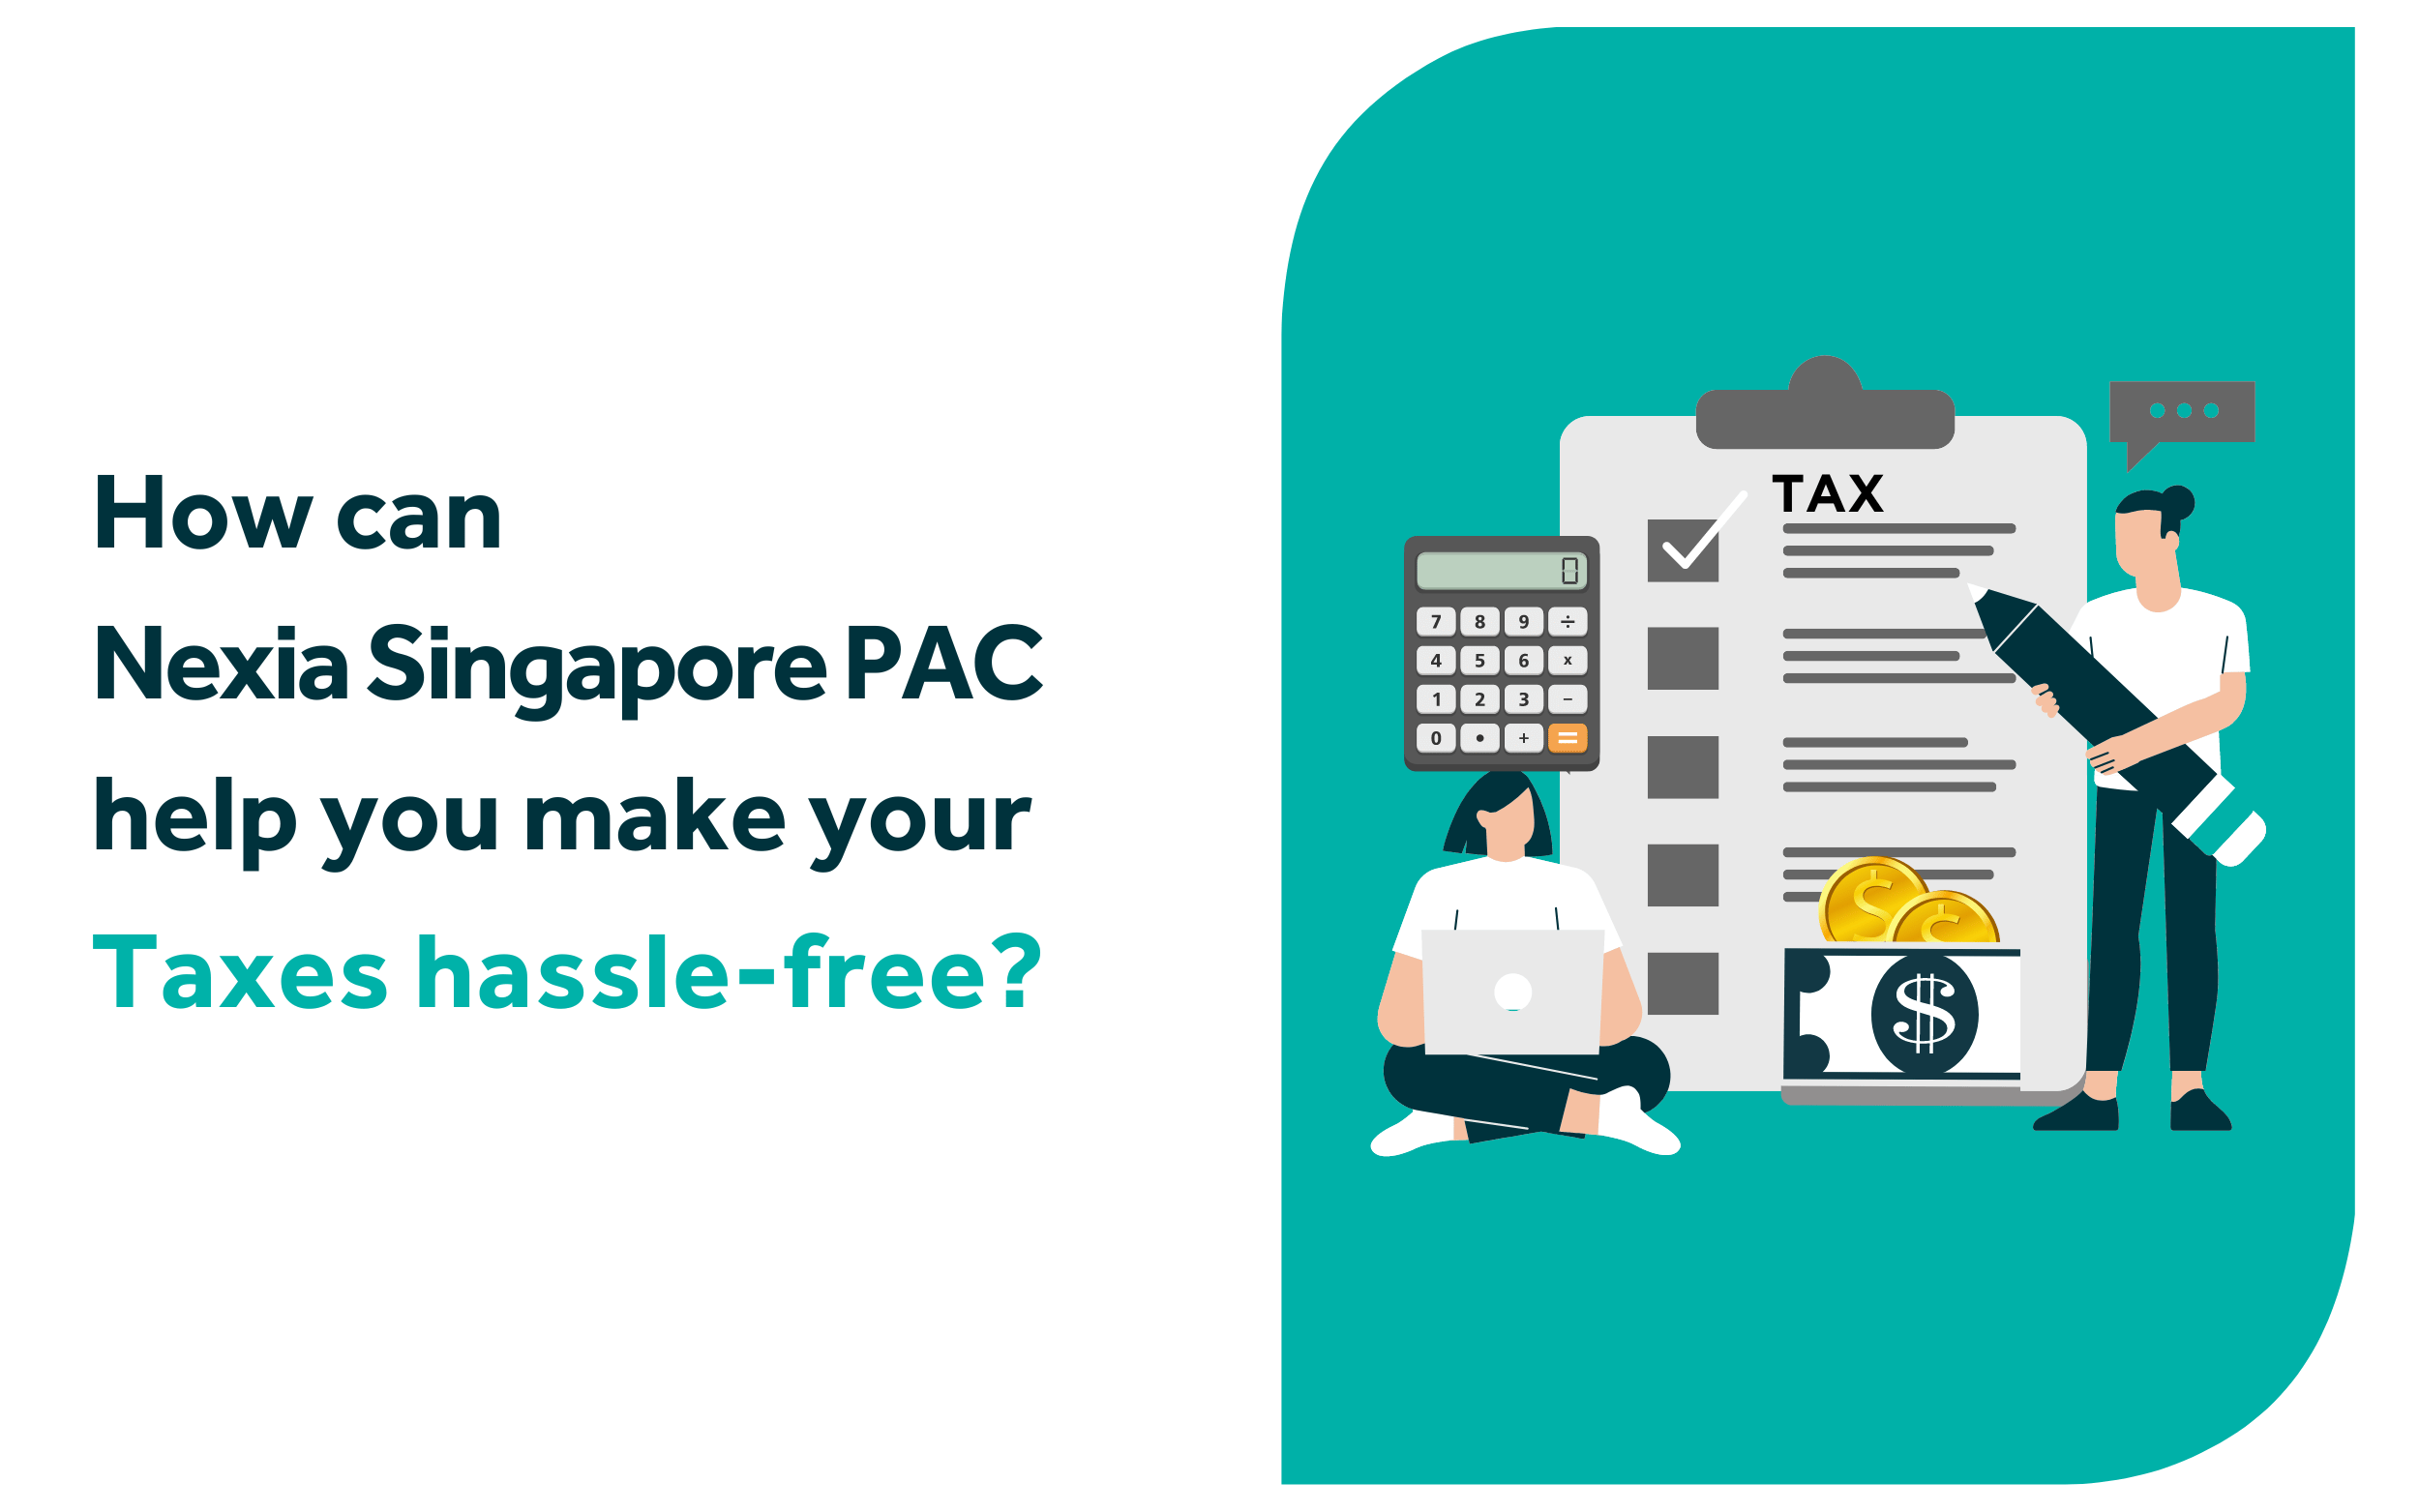 How can Kreston ACA PAC help you make your Taxes hassle-free